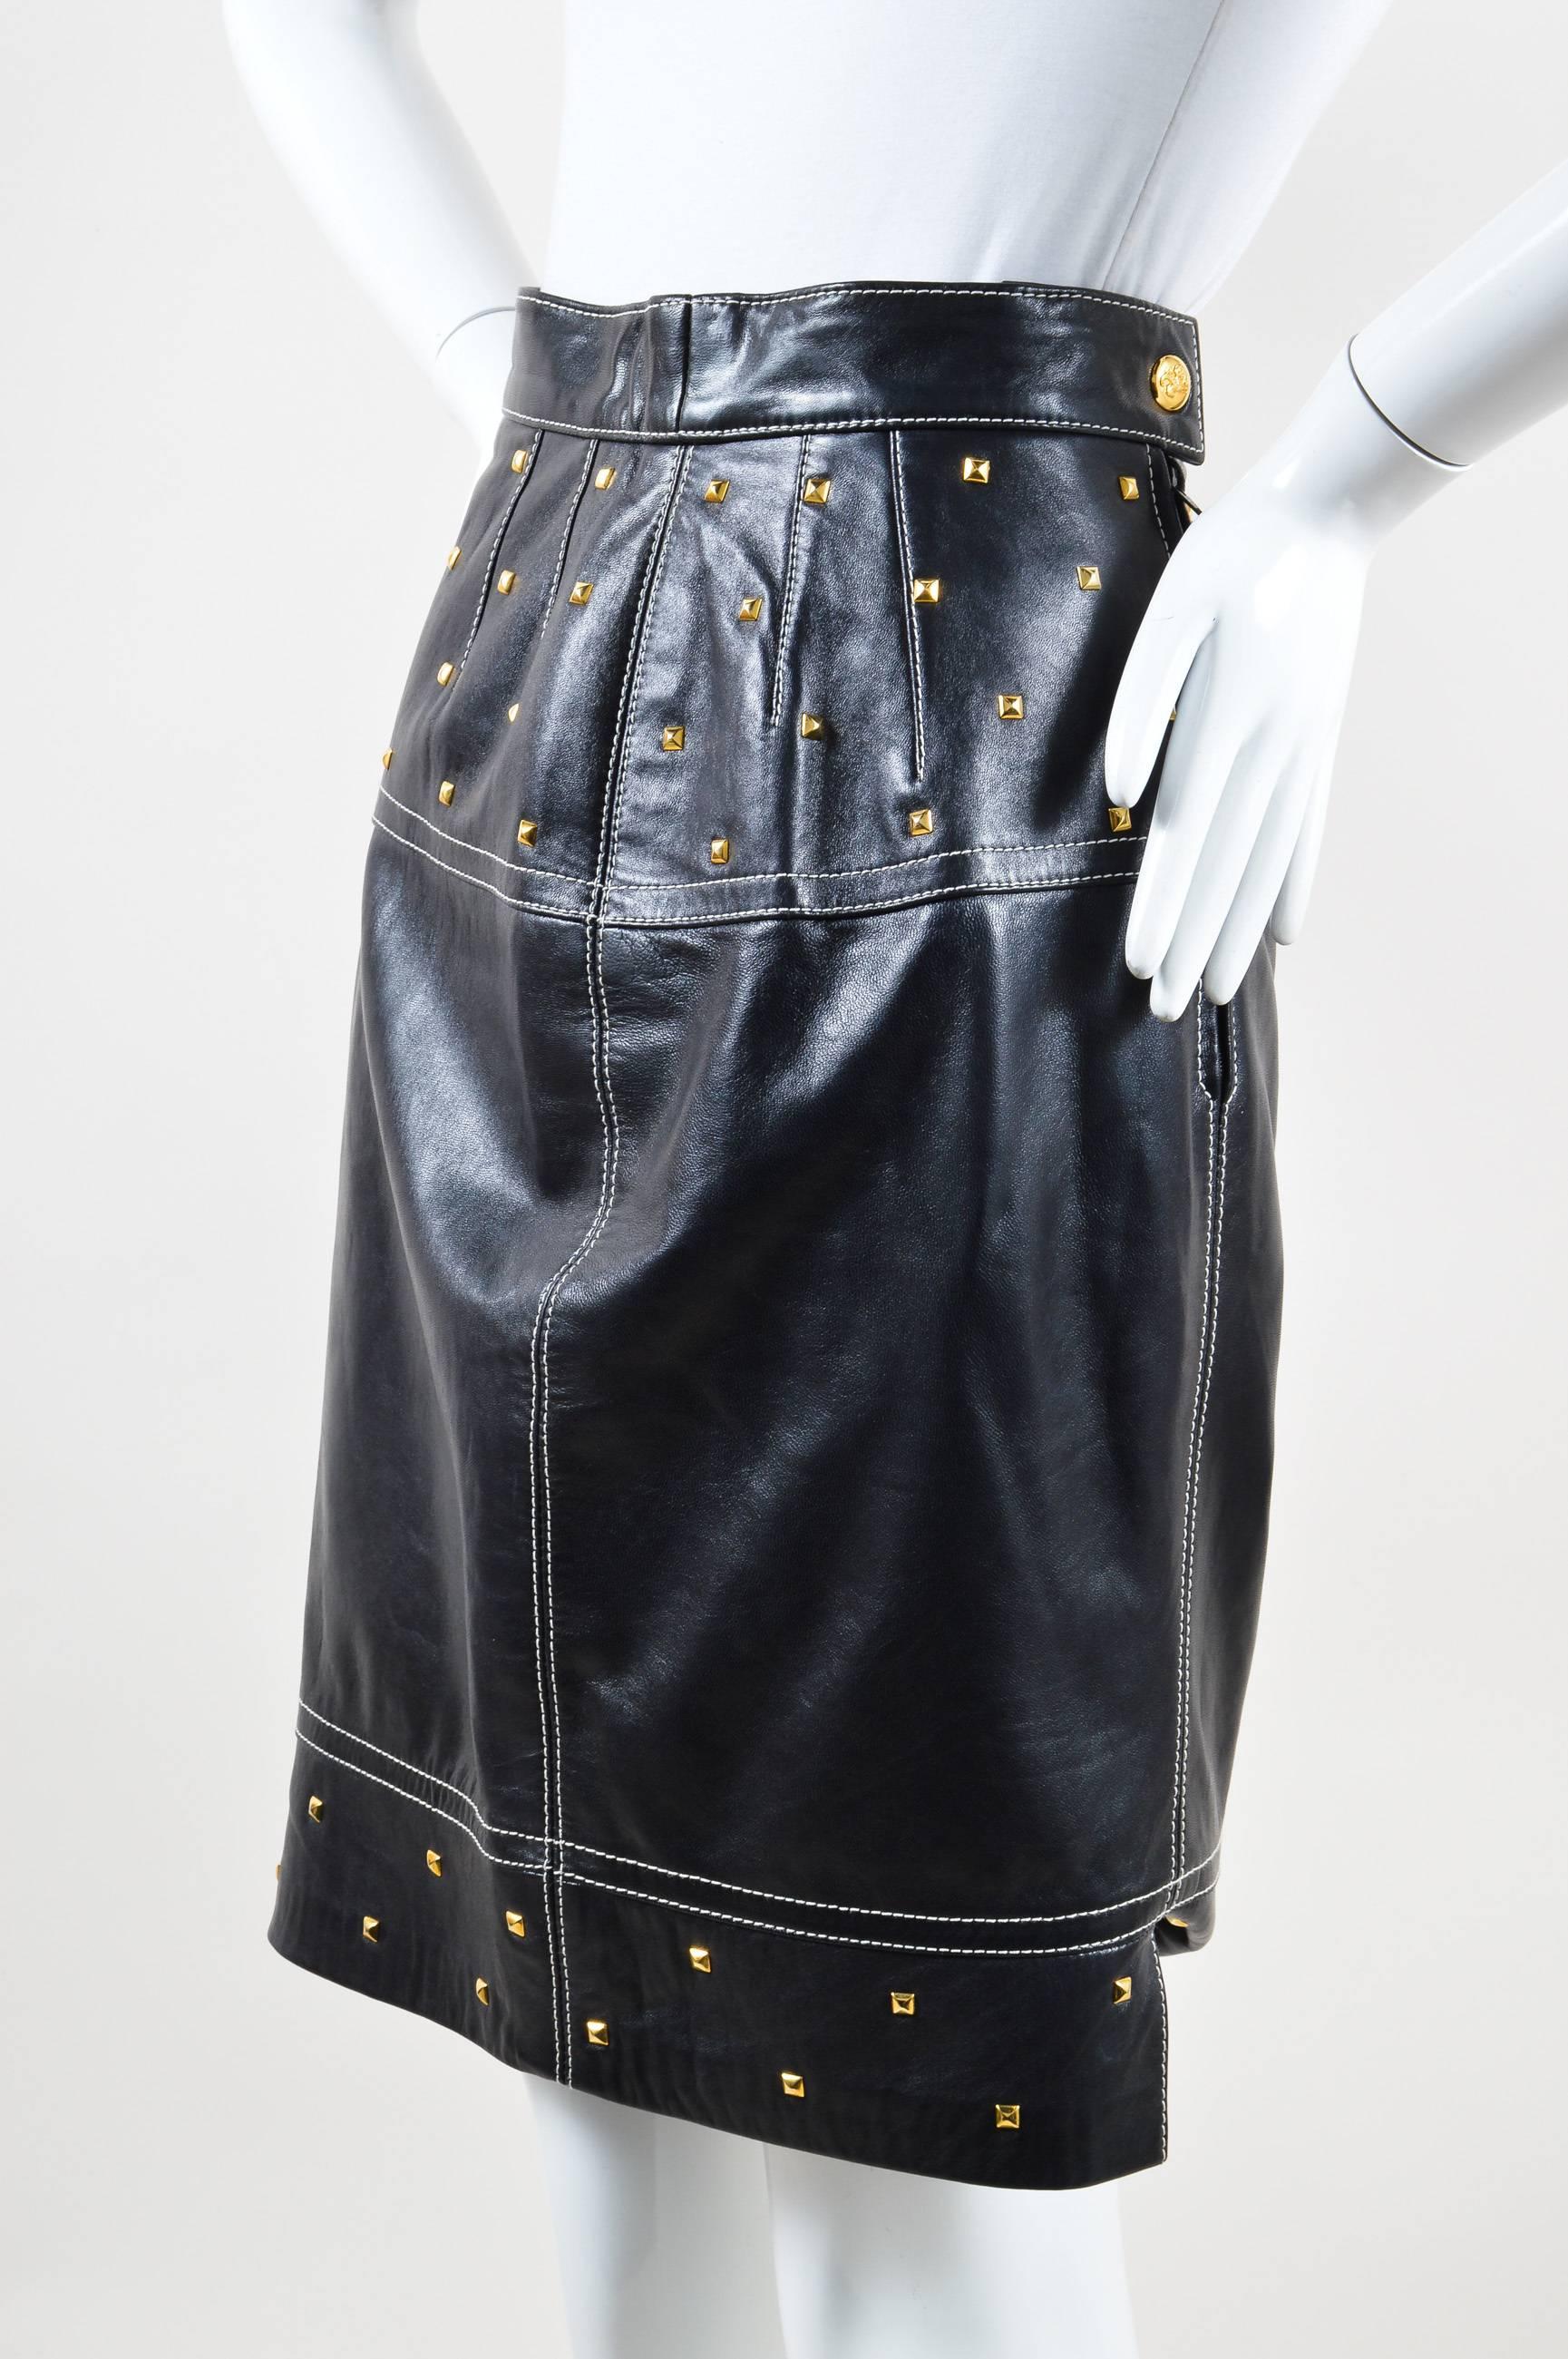 Unique vintage skirt that can be dressed up or down. Smooth, supple leather. Gold-tone pyramid studded embellishment. Contrast white stitching. Hits at knees. Hidden back zip closure. Back snap button closure. Lined. 